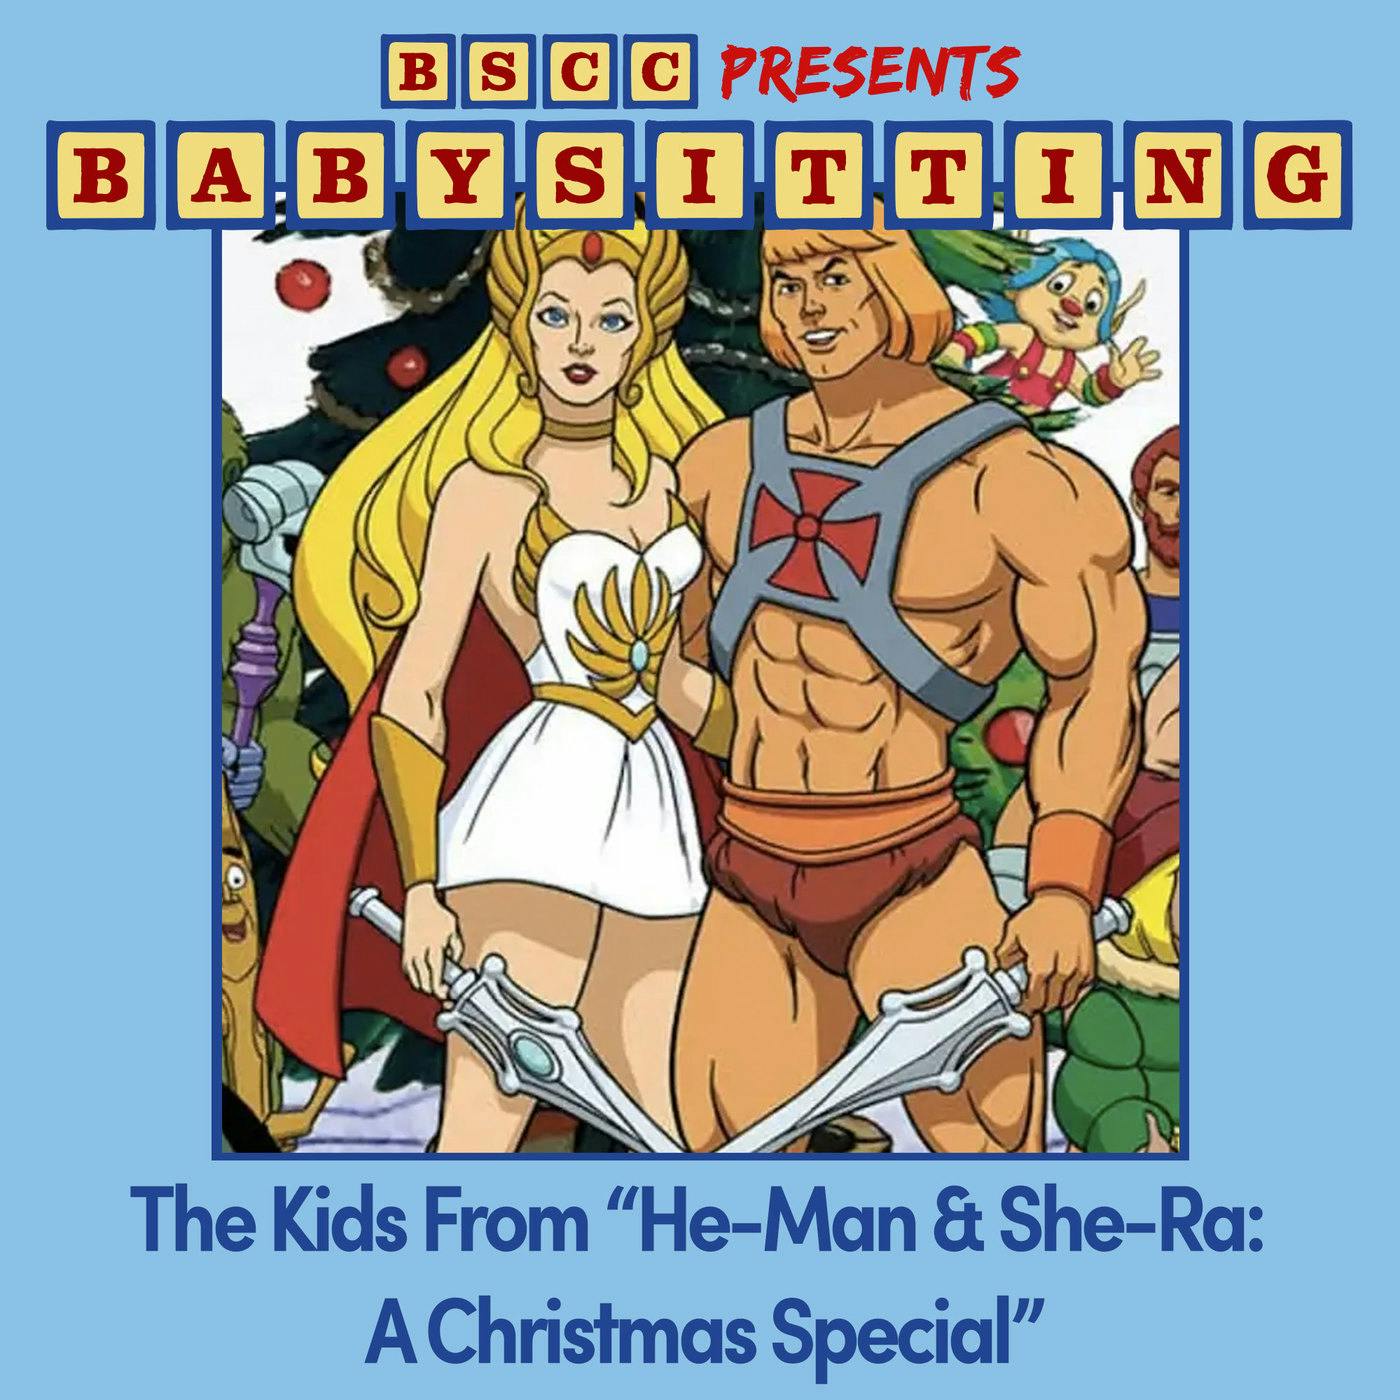 BSCC Presents: Babysitting the Kids in ”He-Man & She-Ra: A Christmas Special”